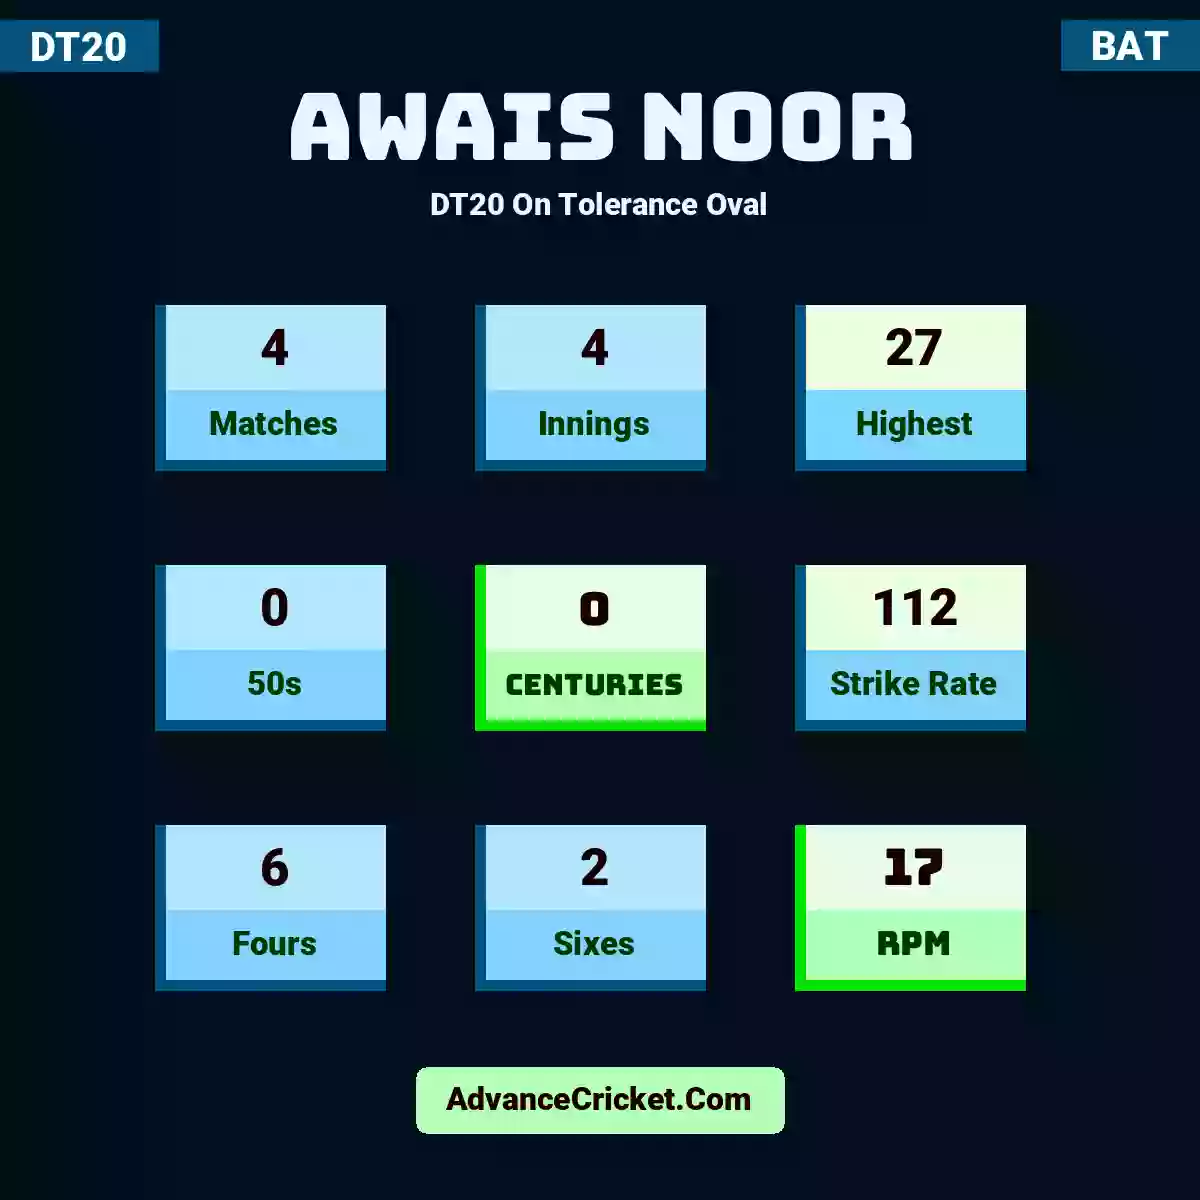 Awais Noor DT20  On Tolerance Oval, Awais Noor played 4 matches, scored 27 runs as highest, 0 half-centuries, and 0 centuries, with a strike rate of 112. A.Noor hit 6 fours and 2 sixes, with an RPM of 17.